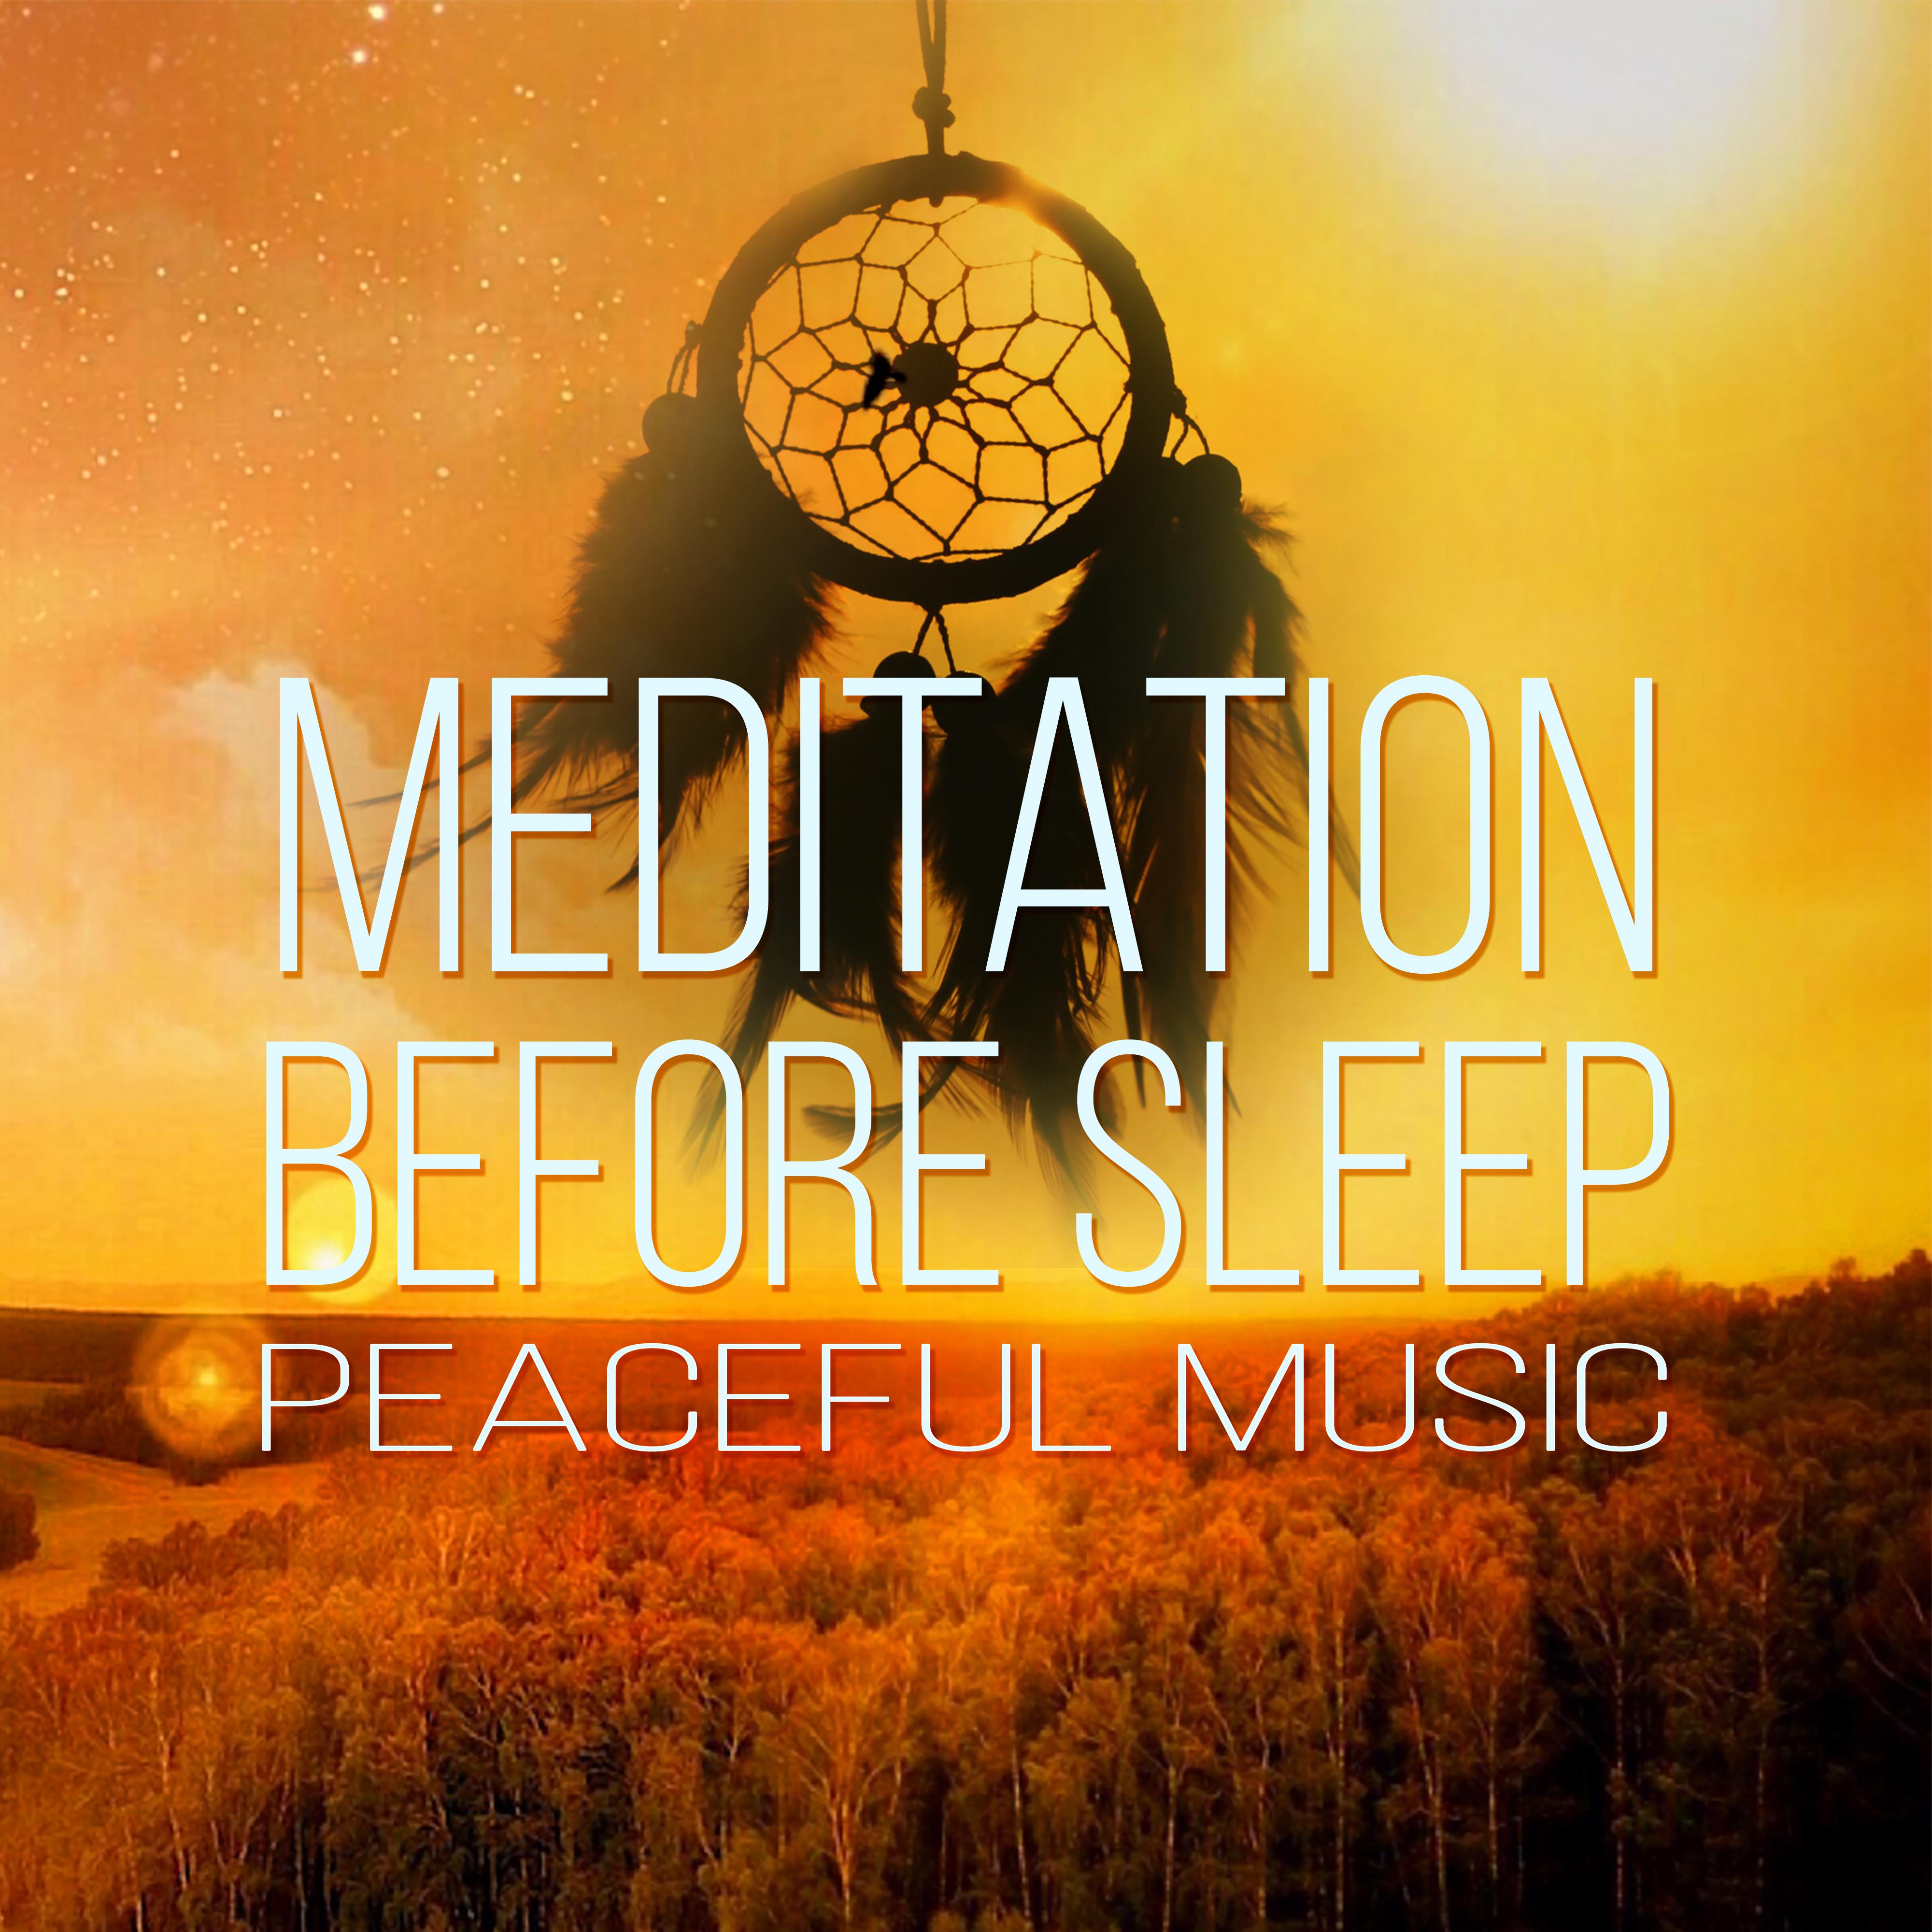 Meditation Before Sleep – Peaceful Music for Sensual Massage, Deep Sleep & Dreams, Restful Sleep, Sounds of Nature, Chill Out Music, Healing Relaxation Meditation